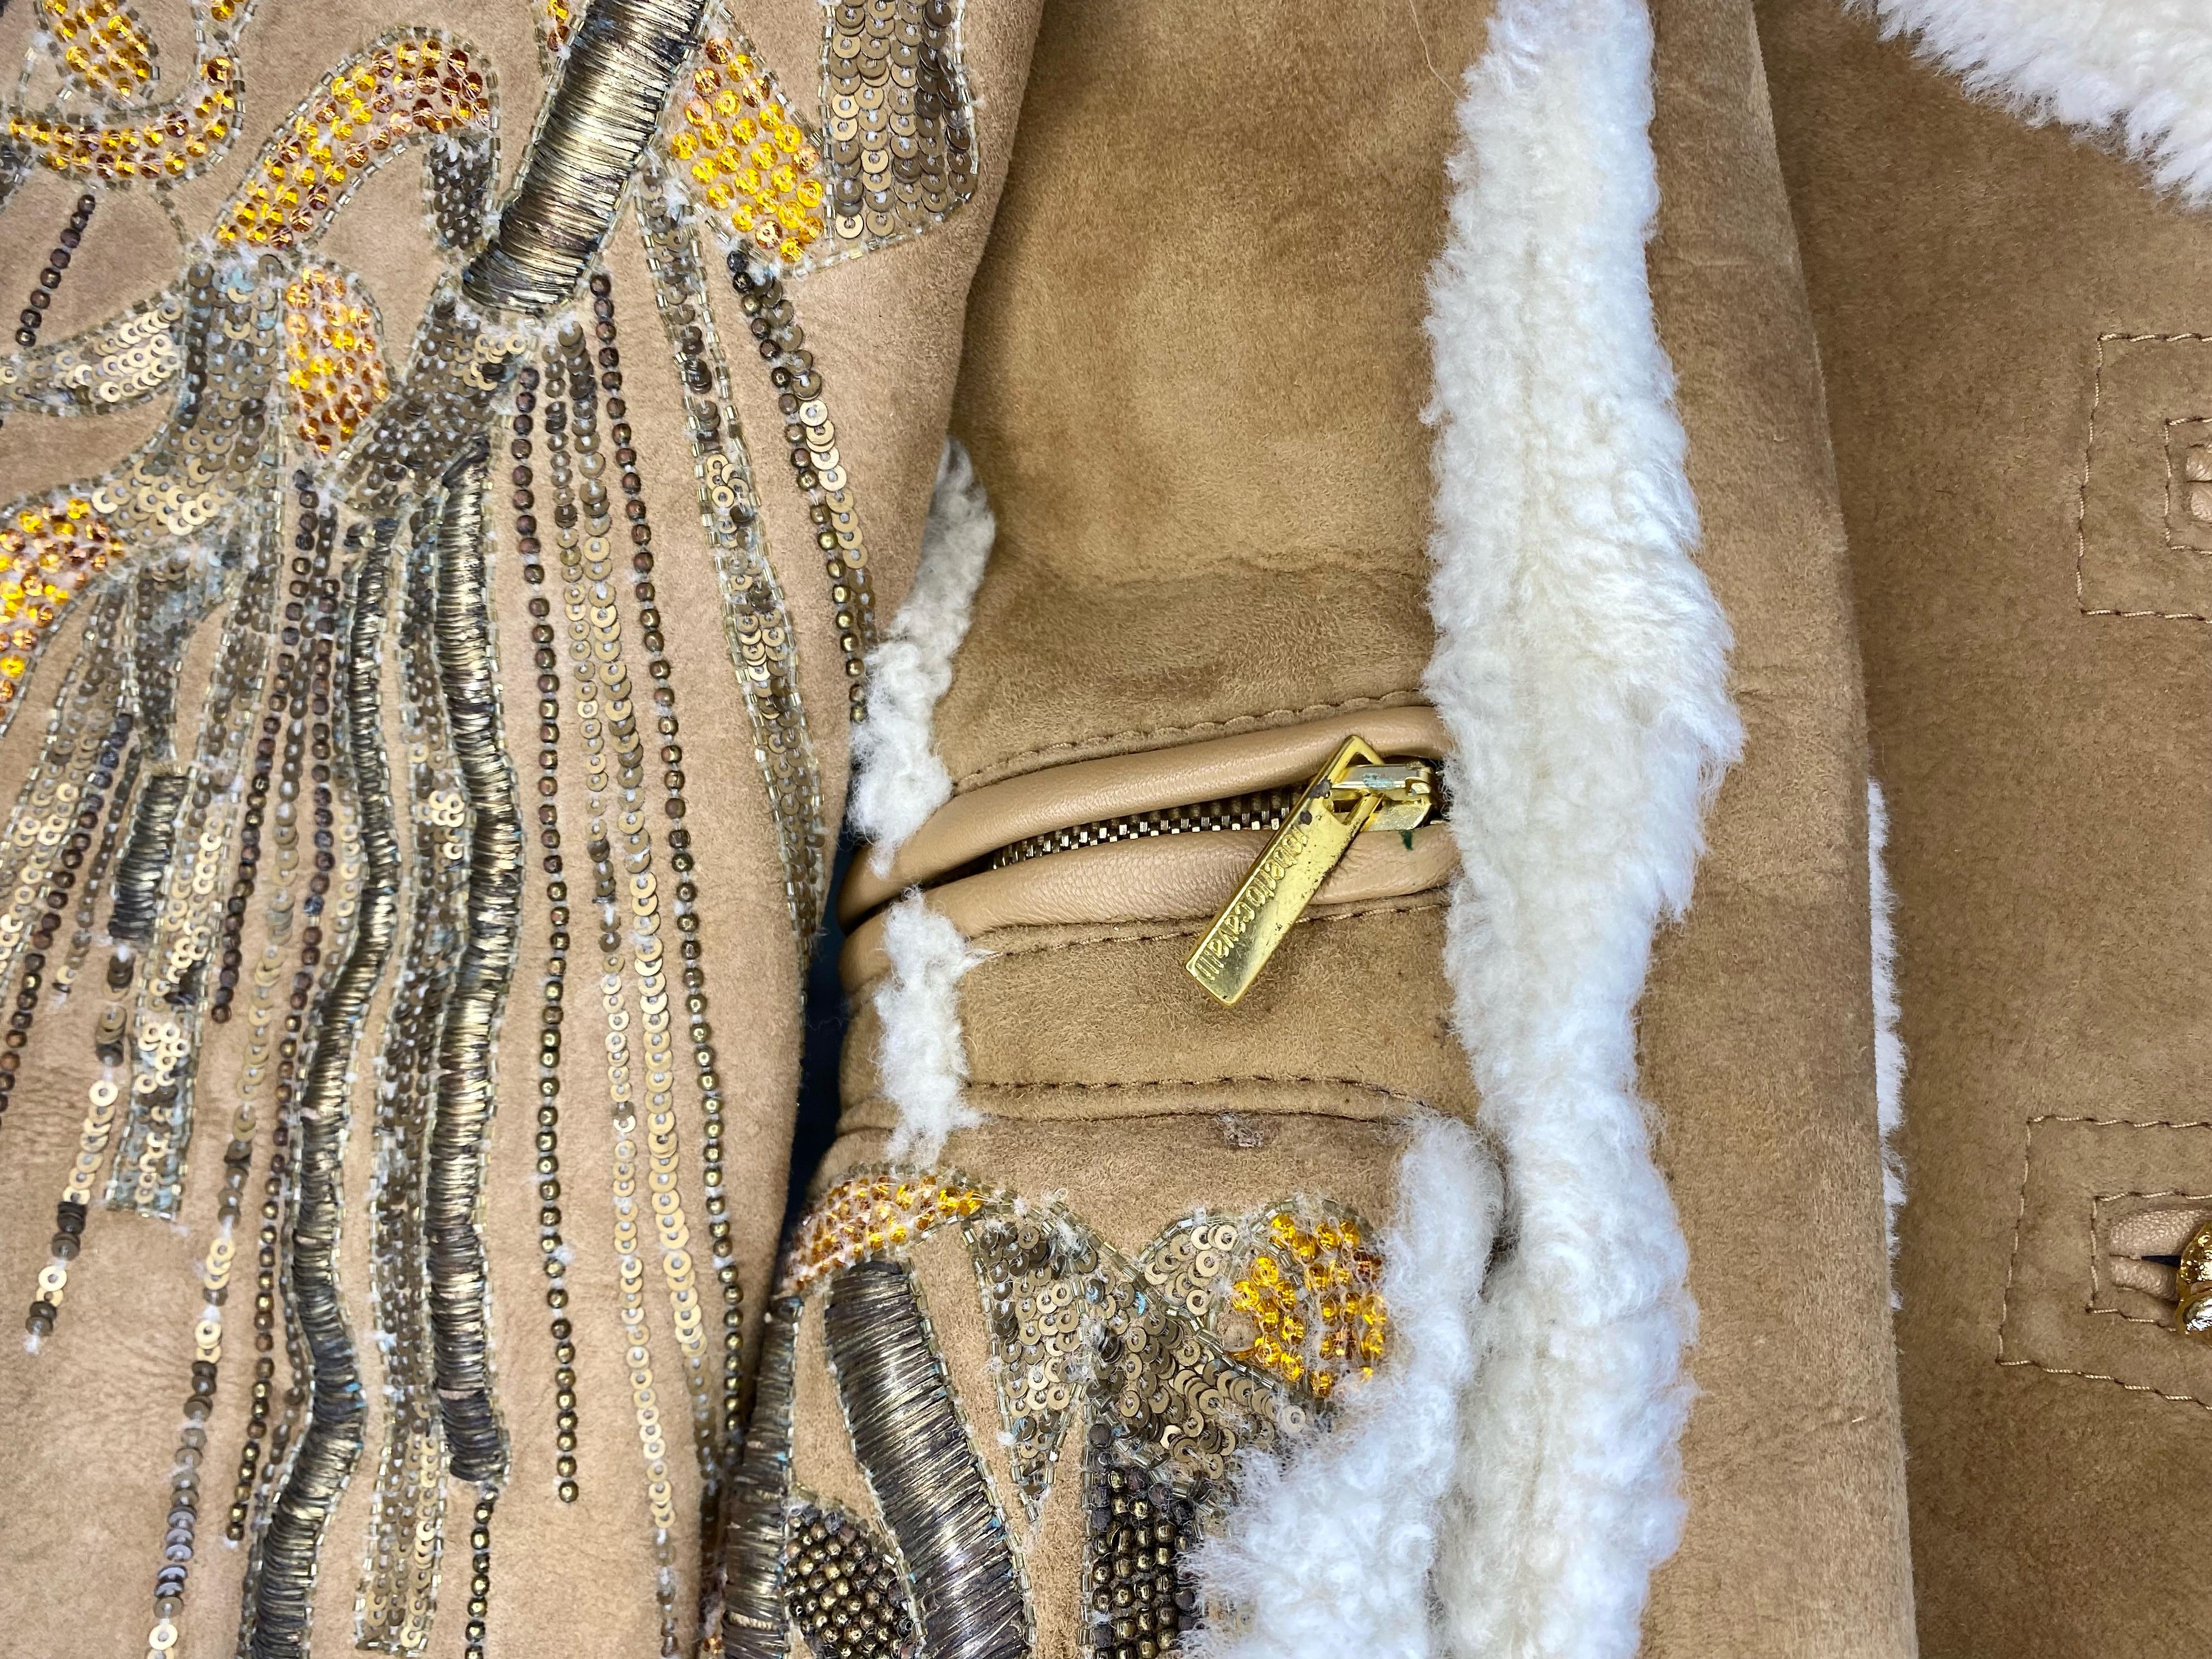 F/W 2004 Roberto Cavalli Shearling Leather Coat Unicorn Sequin Bead Embellished For Sale 9